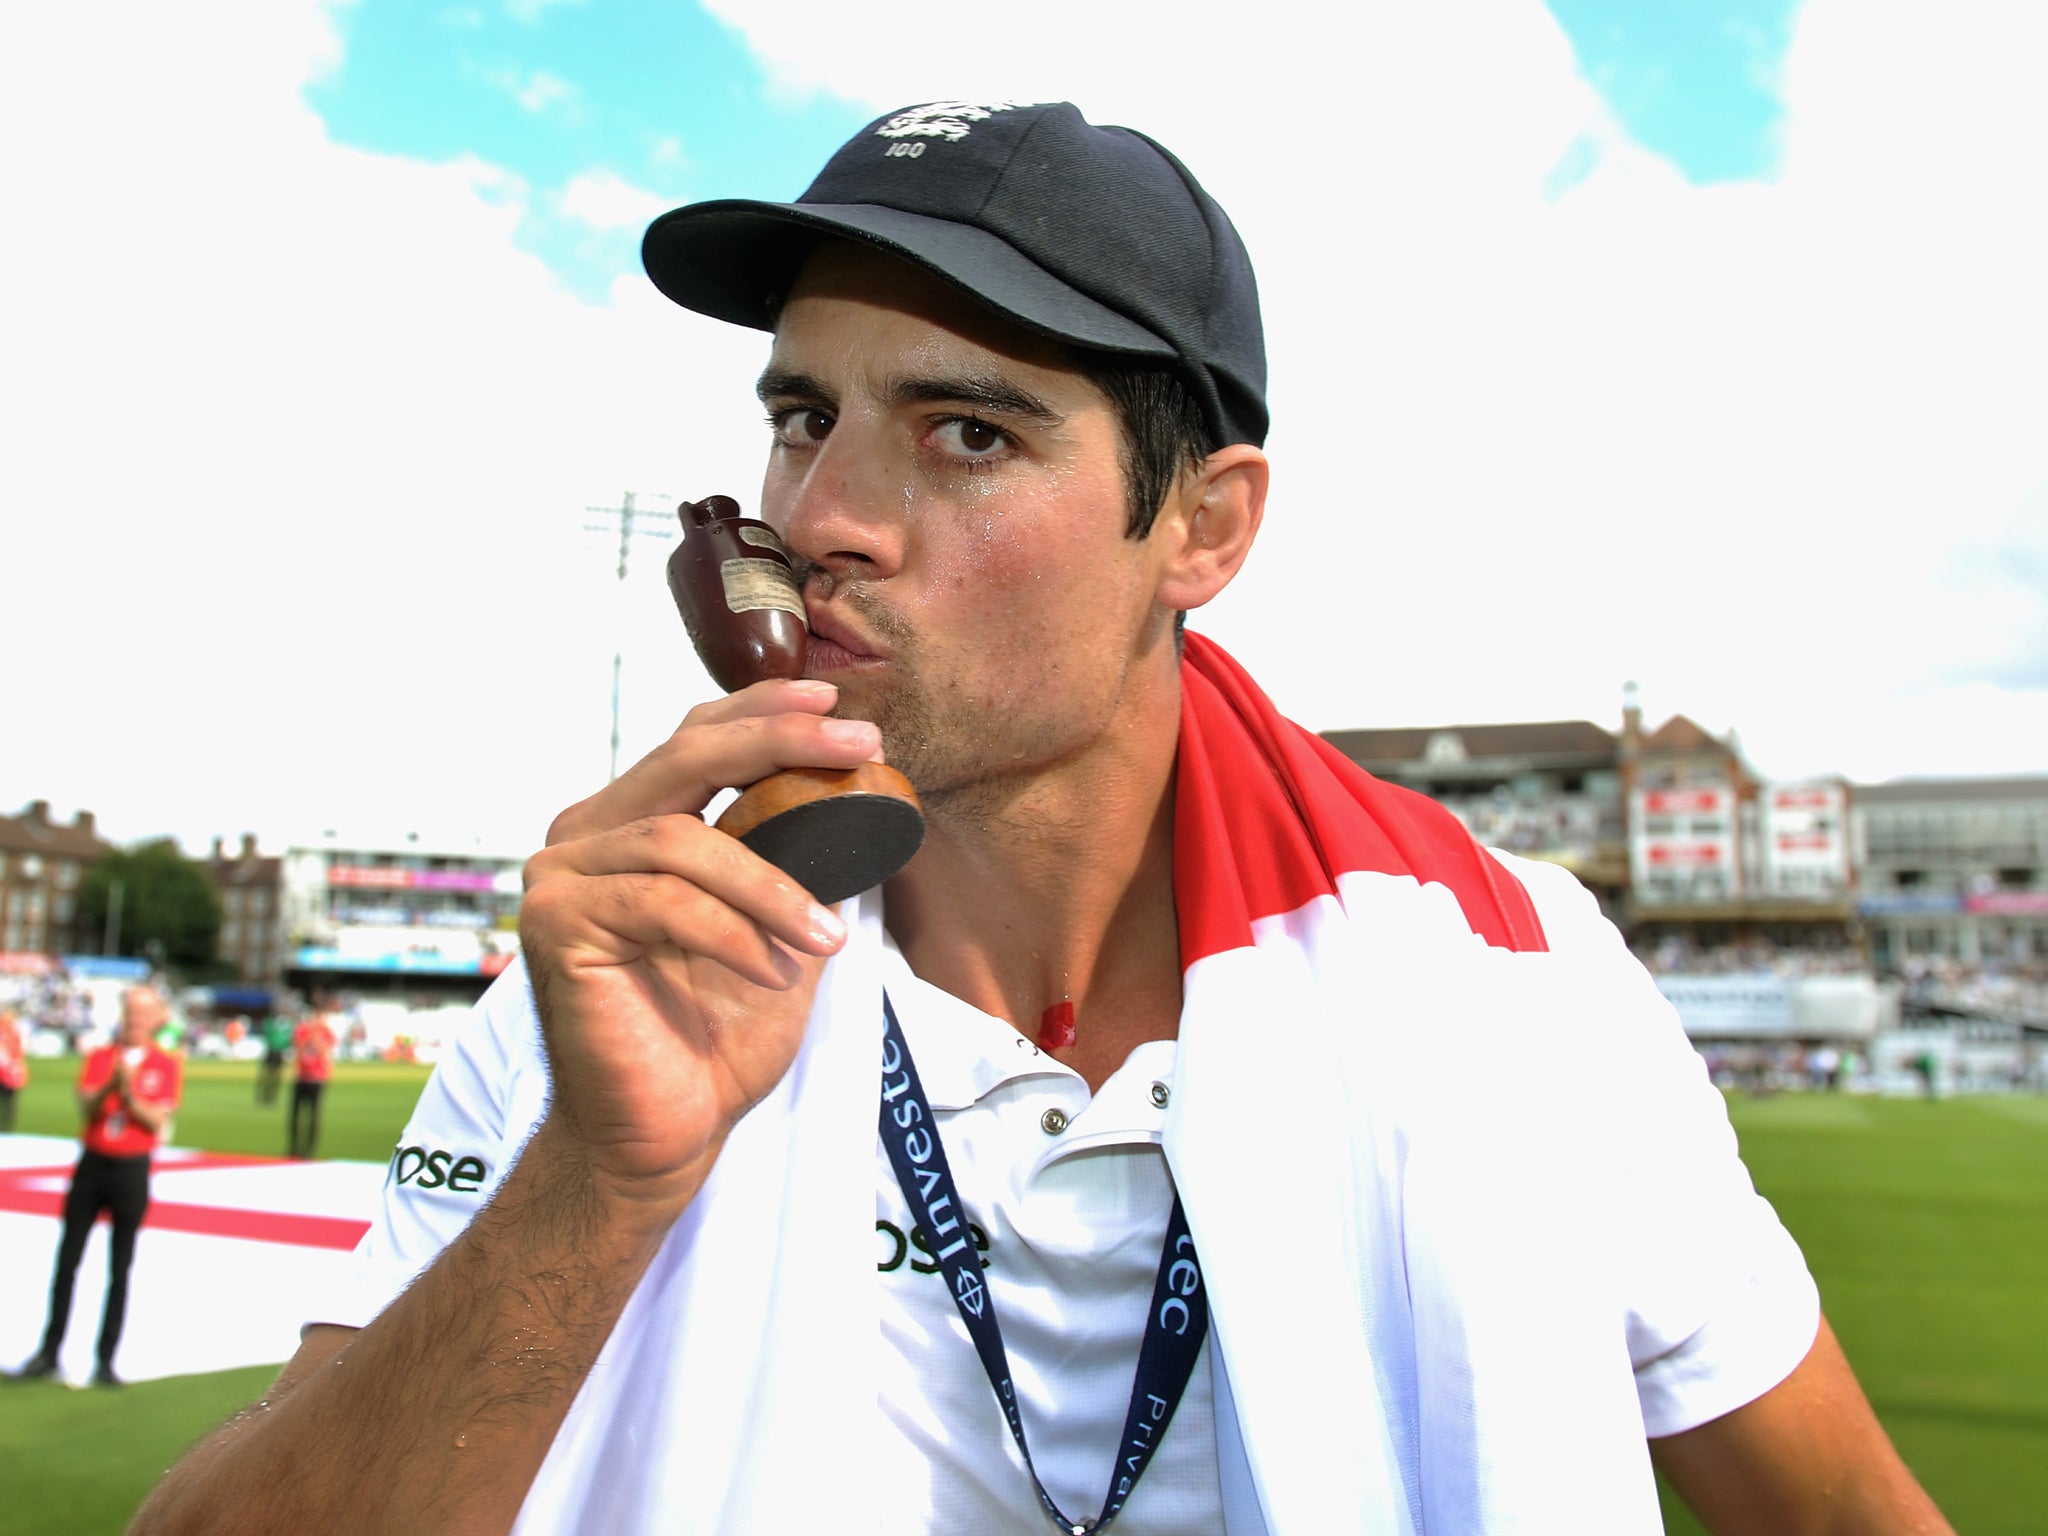 Alastair Cook led England to Ashes success four years ago